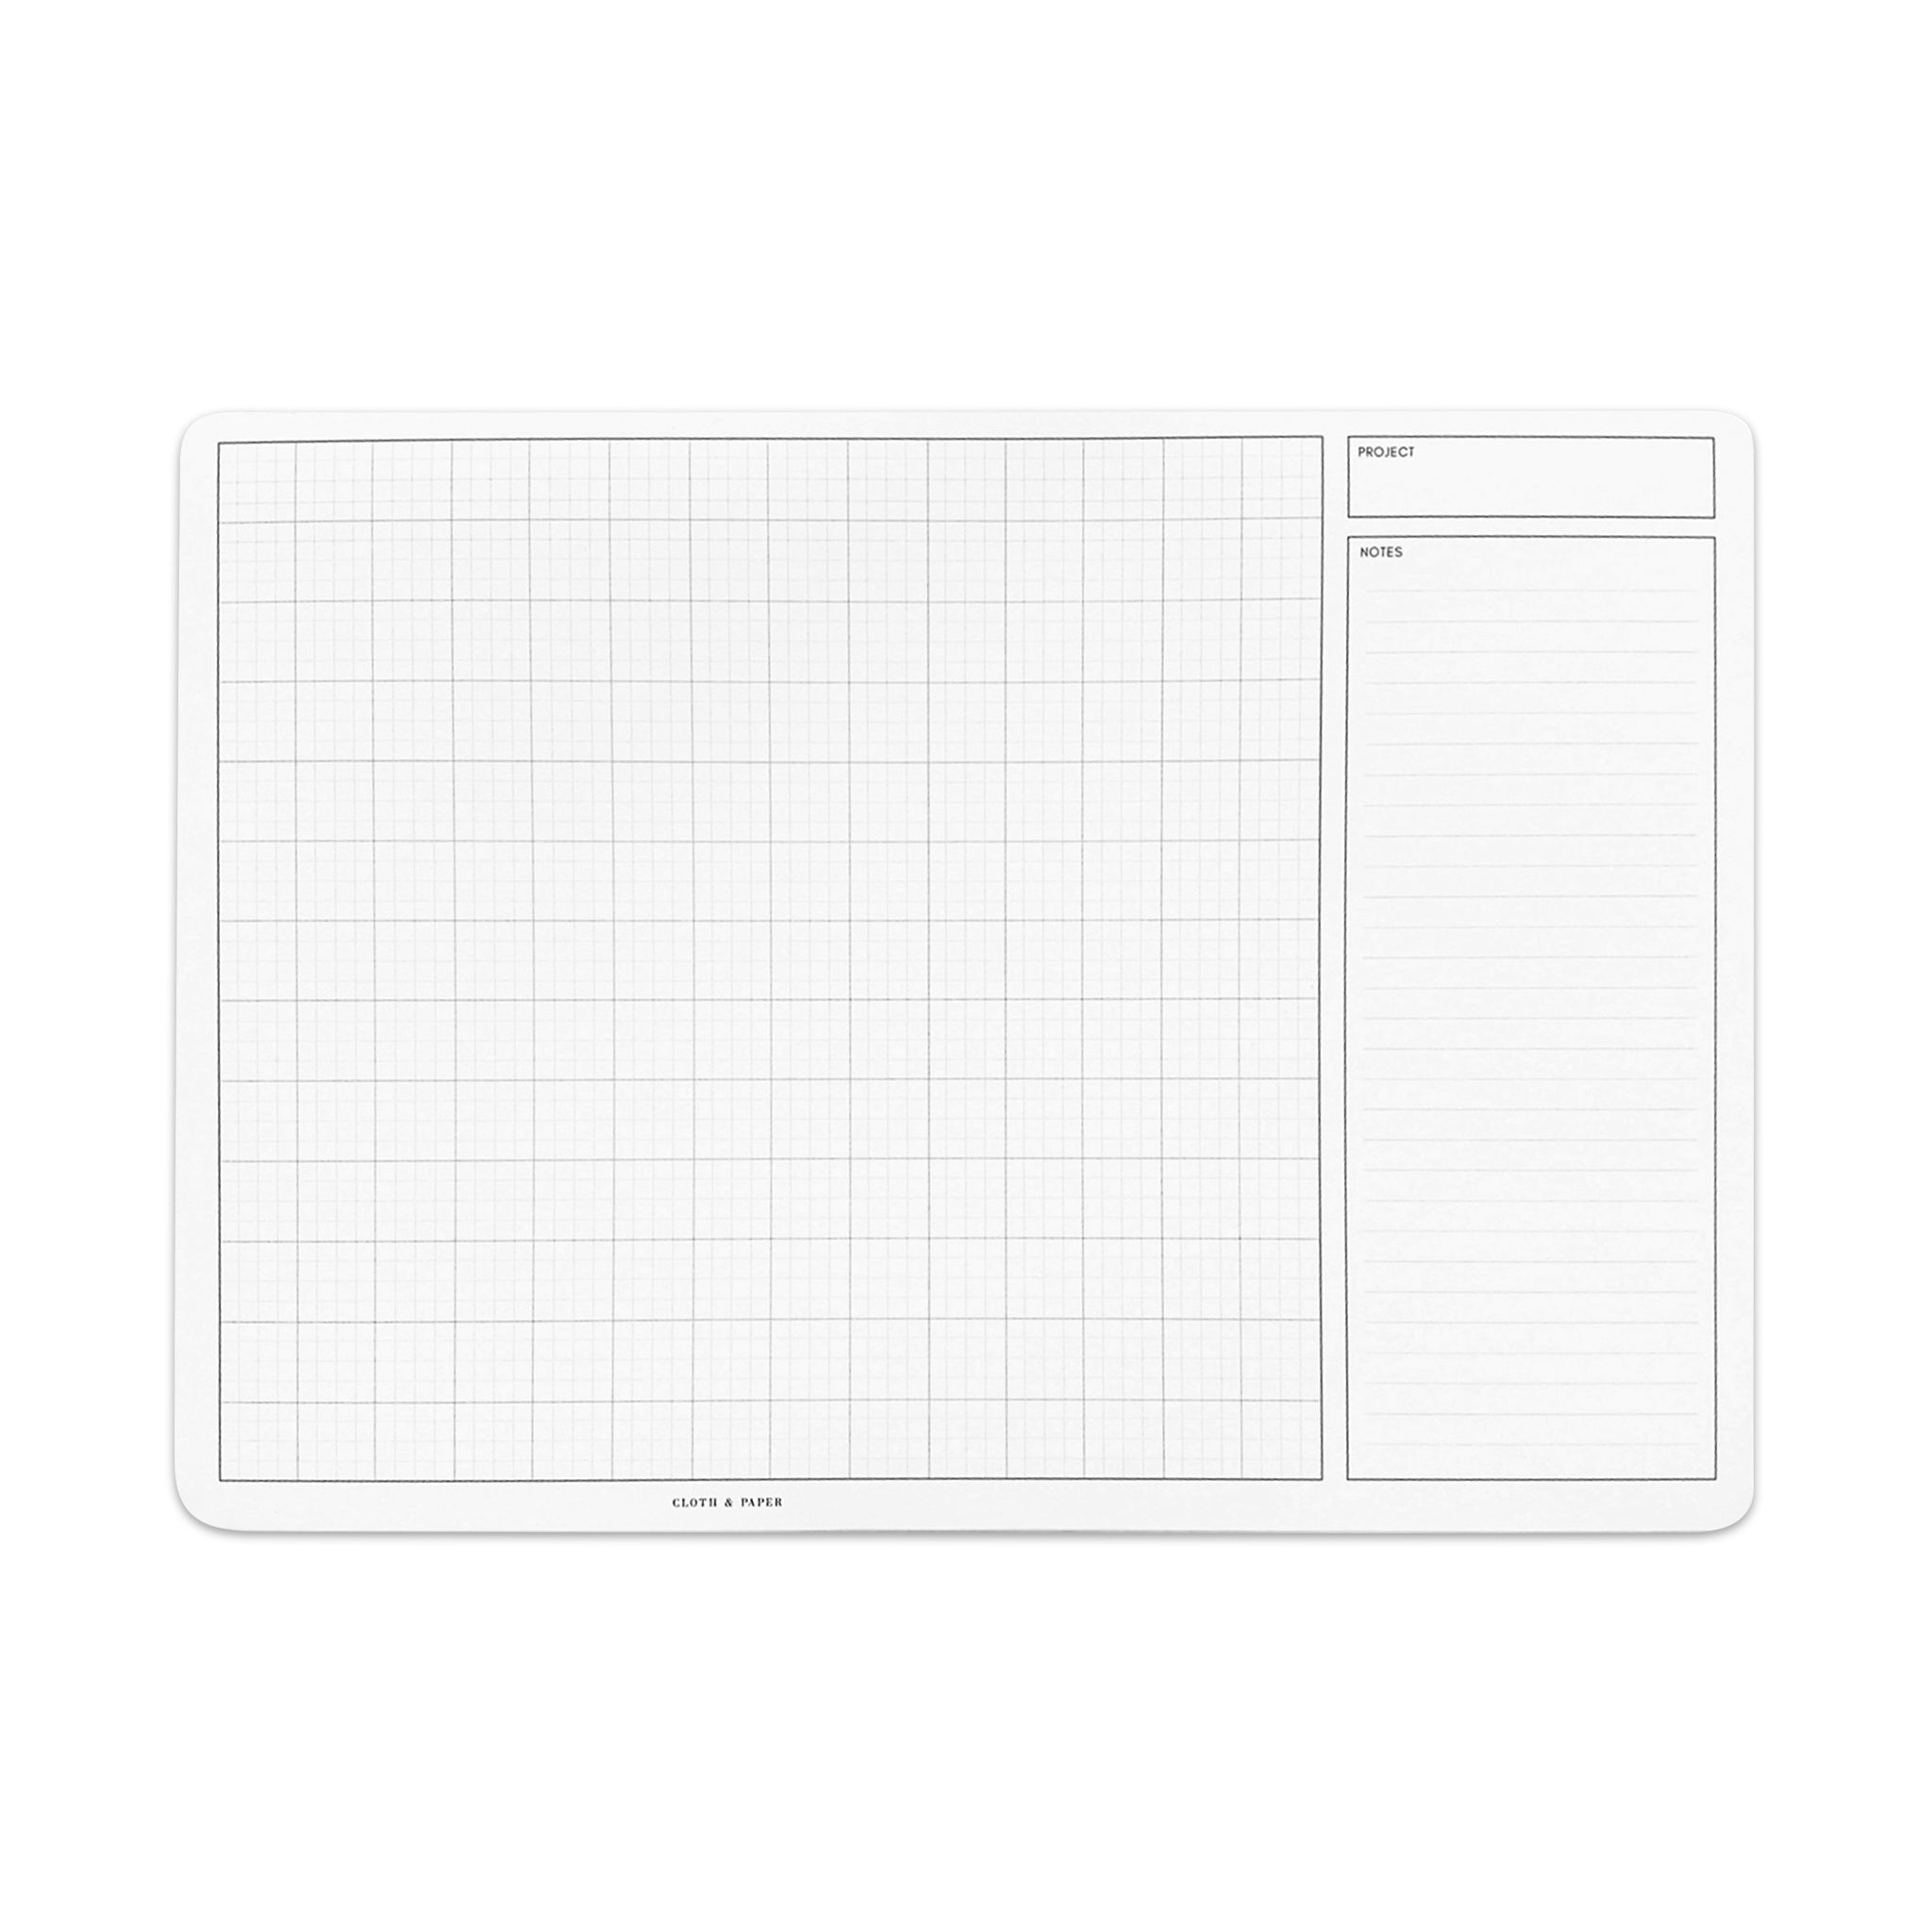 PRO ART 14-Inch by 17-Inch Layout Marker Paper Pad